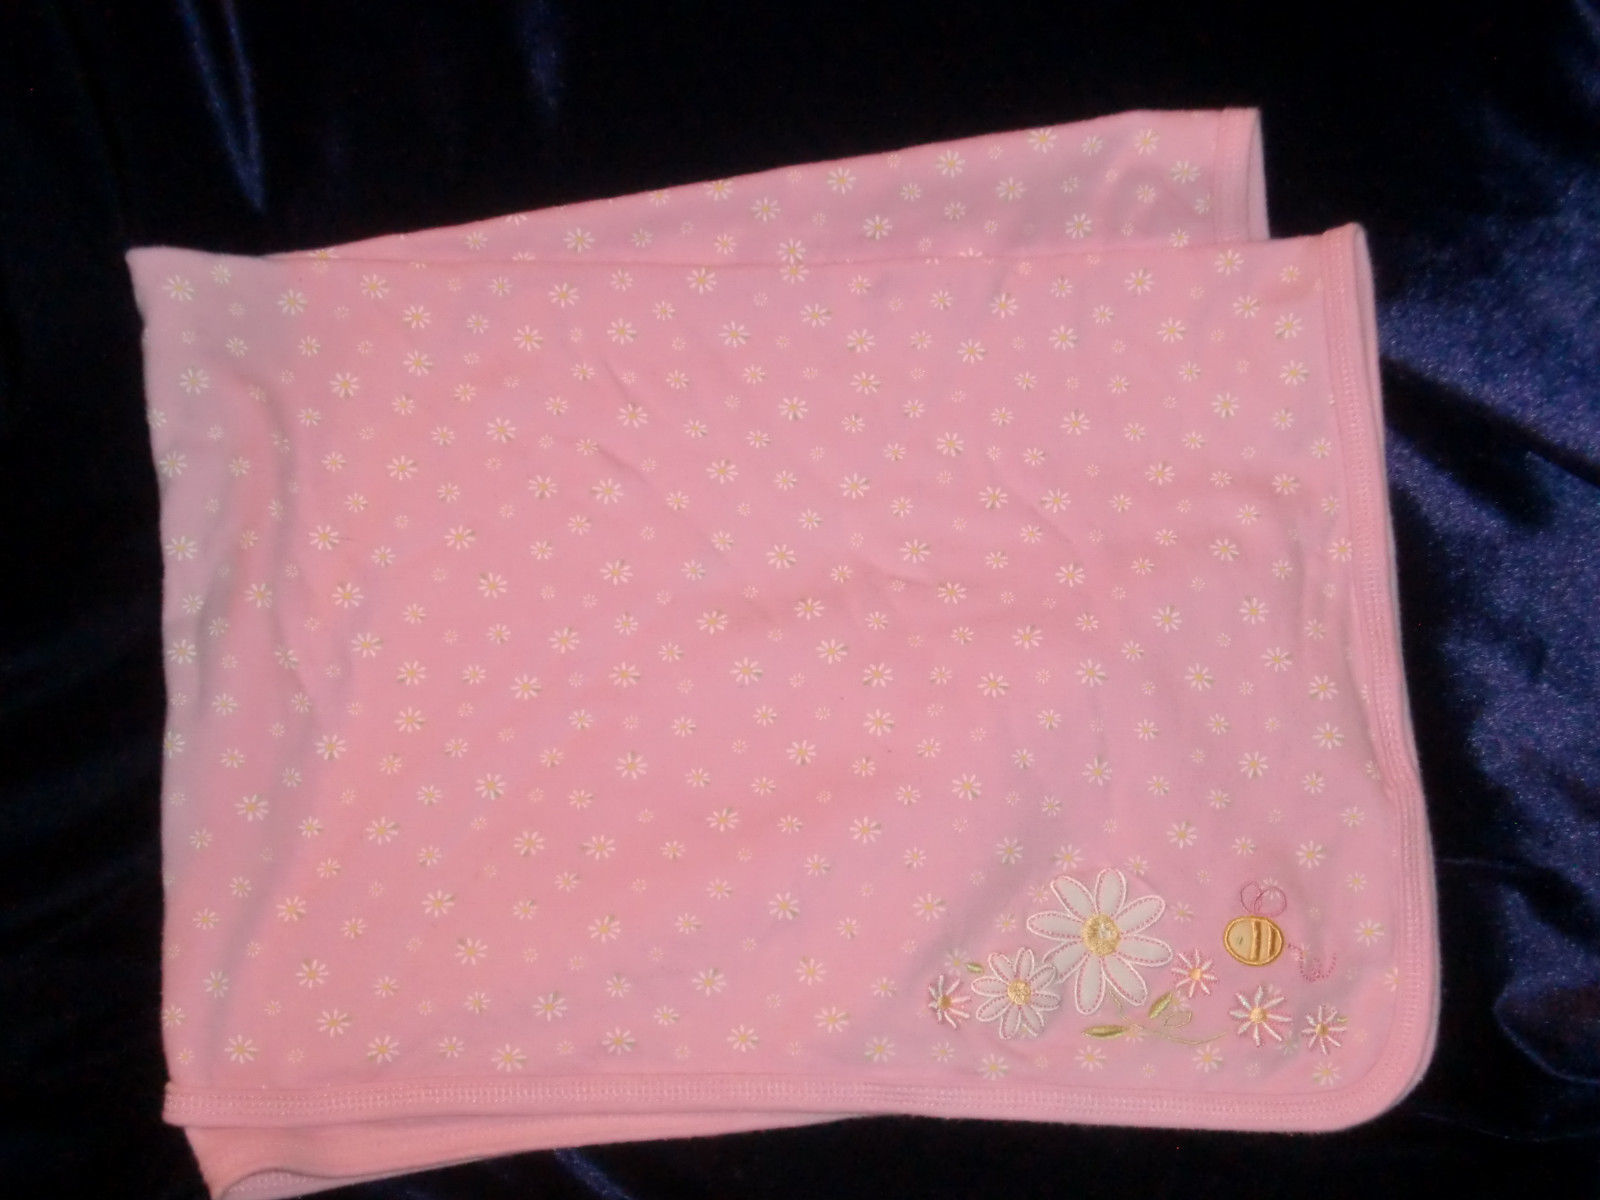 JUST ONE YEAR PINK COTTON RECEIVING BLANKET FLOWERS DAISY BEE BUMBLE BUMBLEBEE - $19.71